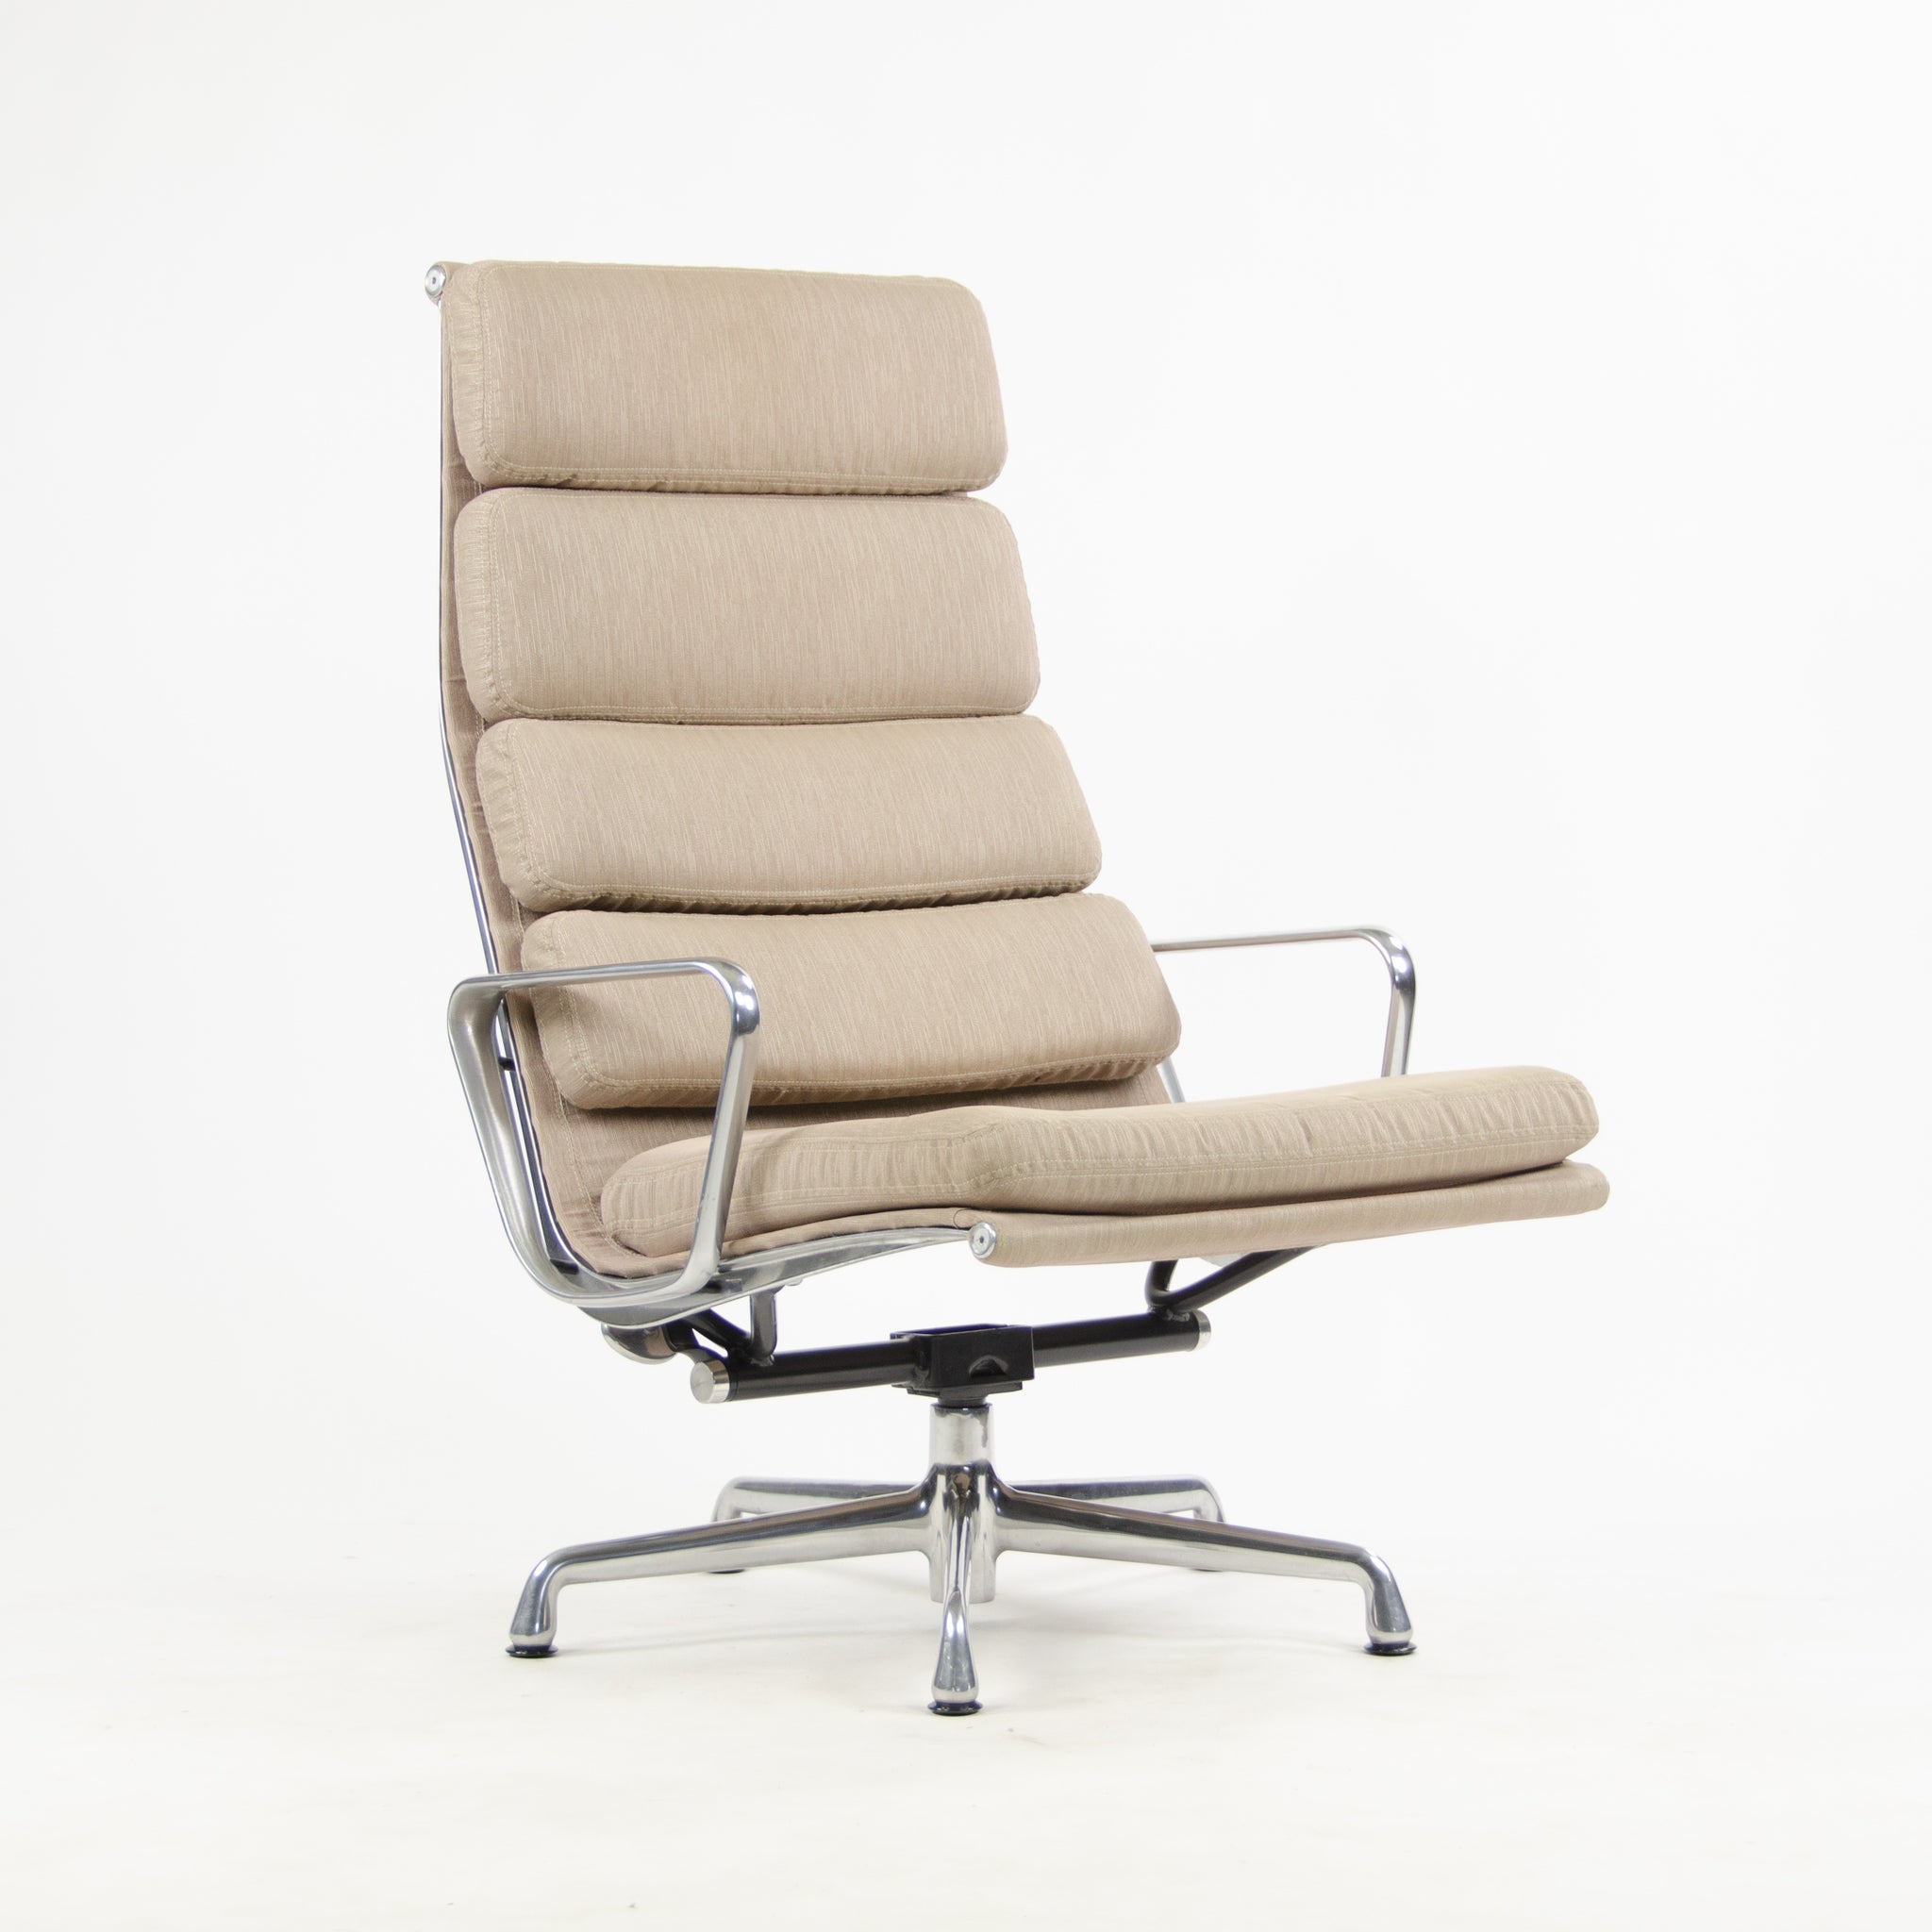 SOLD Herman Miller Eames Soft Pad Aluminum Group Lounge Chairs Fabric 2x 2007